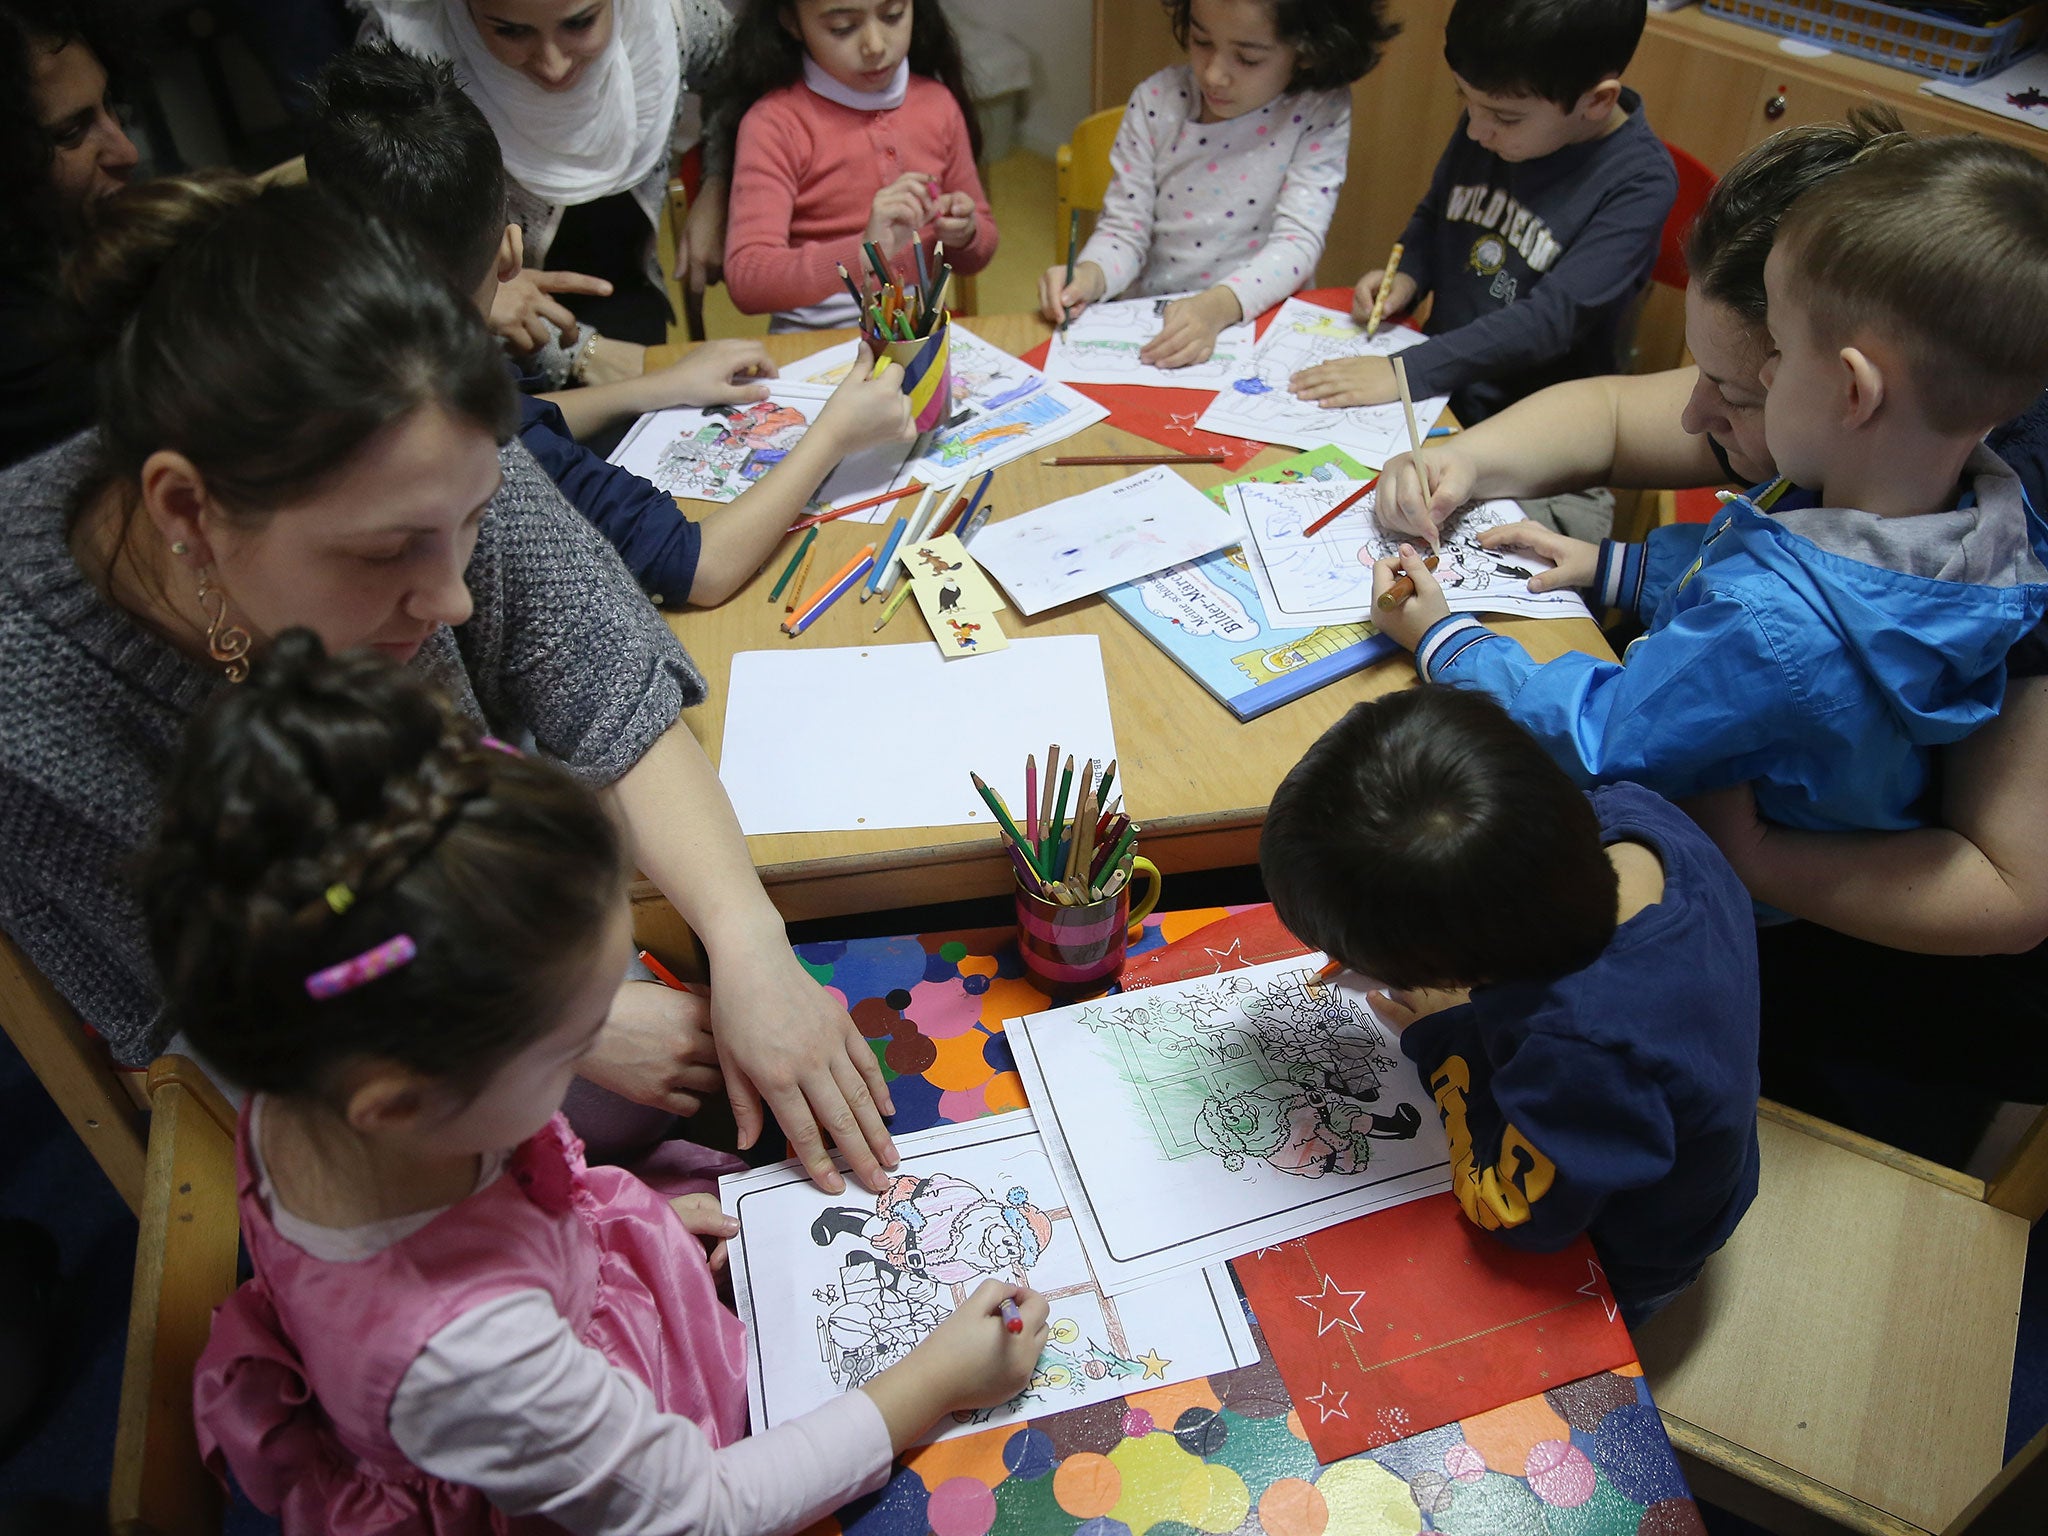 Refugee mothers with their children look through games and books during the presentation of a new initiative to help children of refugees learn to read German at a shelter for migrants and refugees on 16 December, 2015 in Berlin, Germany